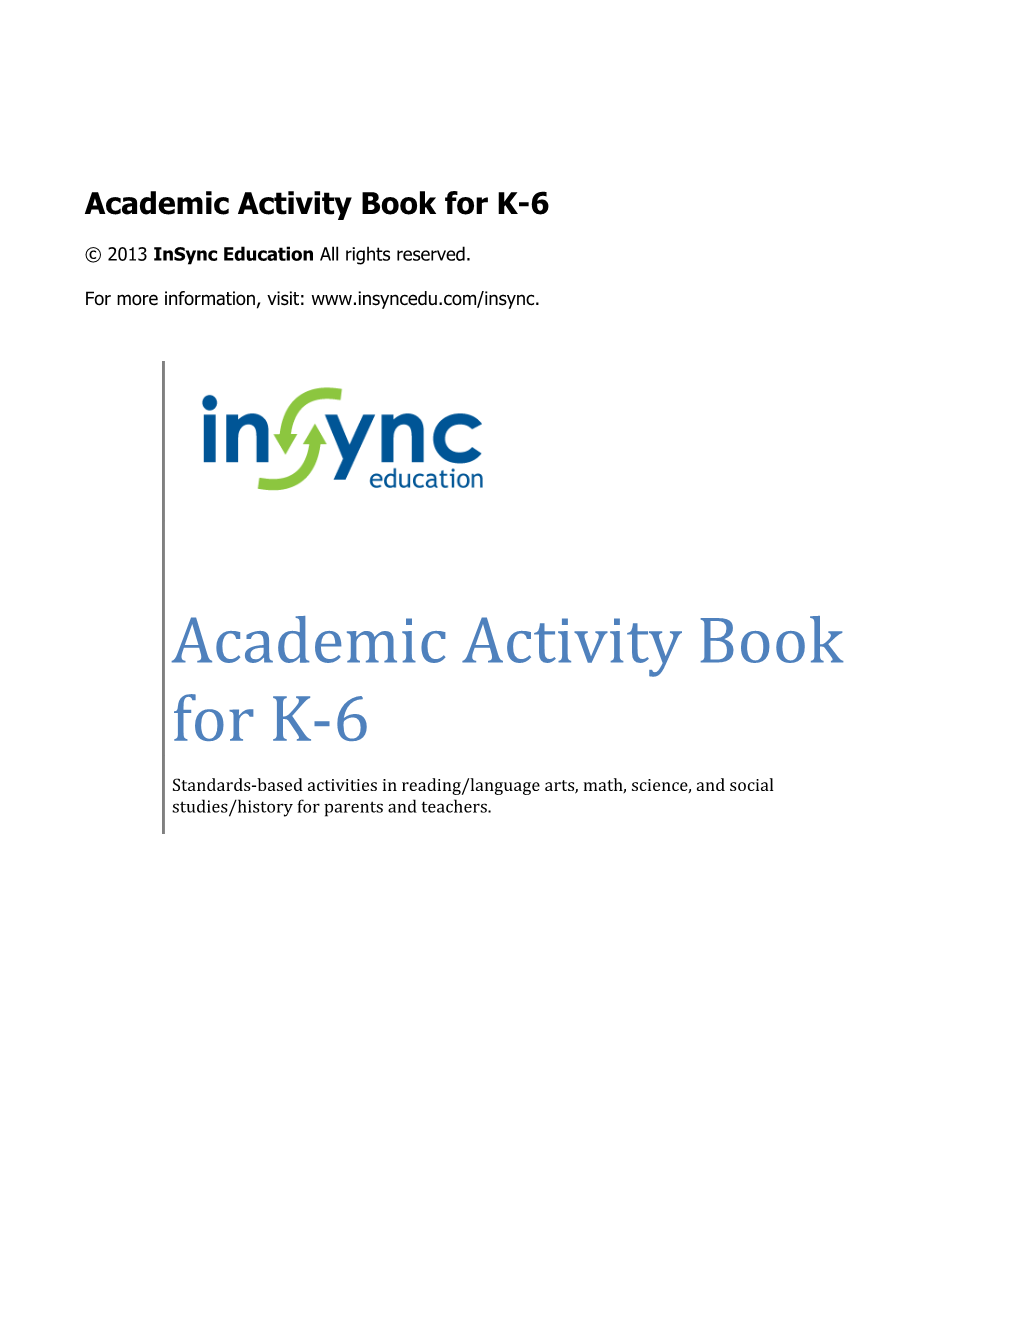 Academic Activity Book for K-6